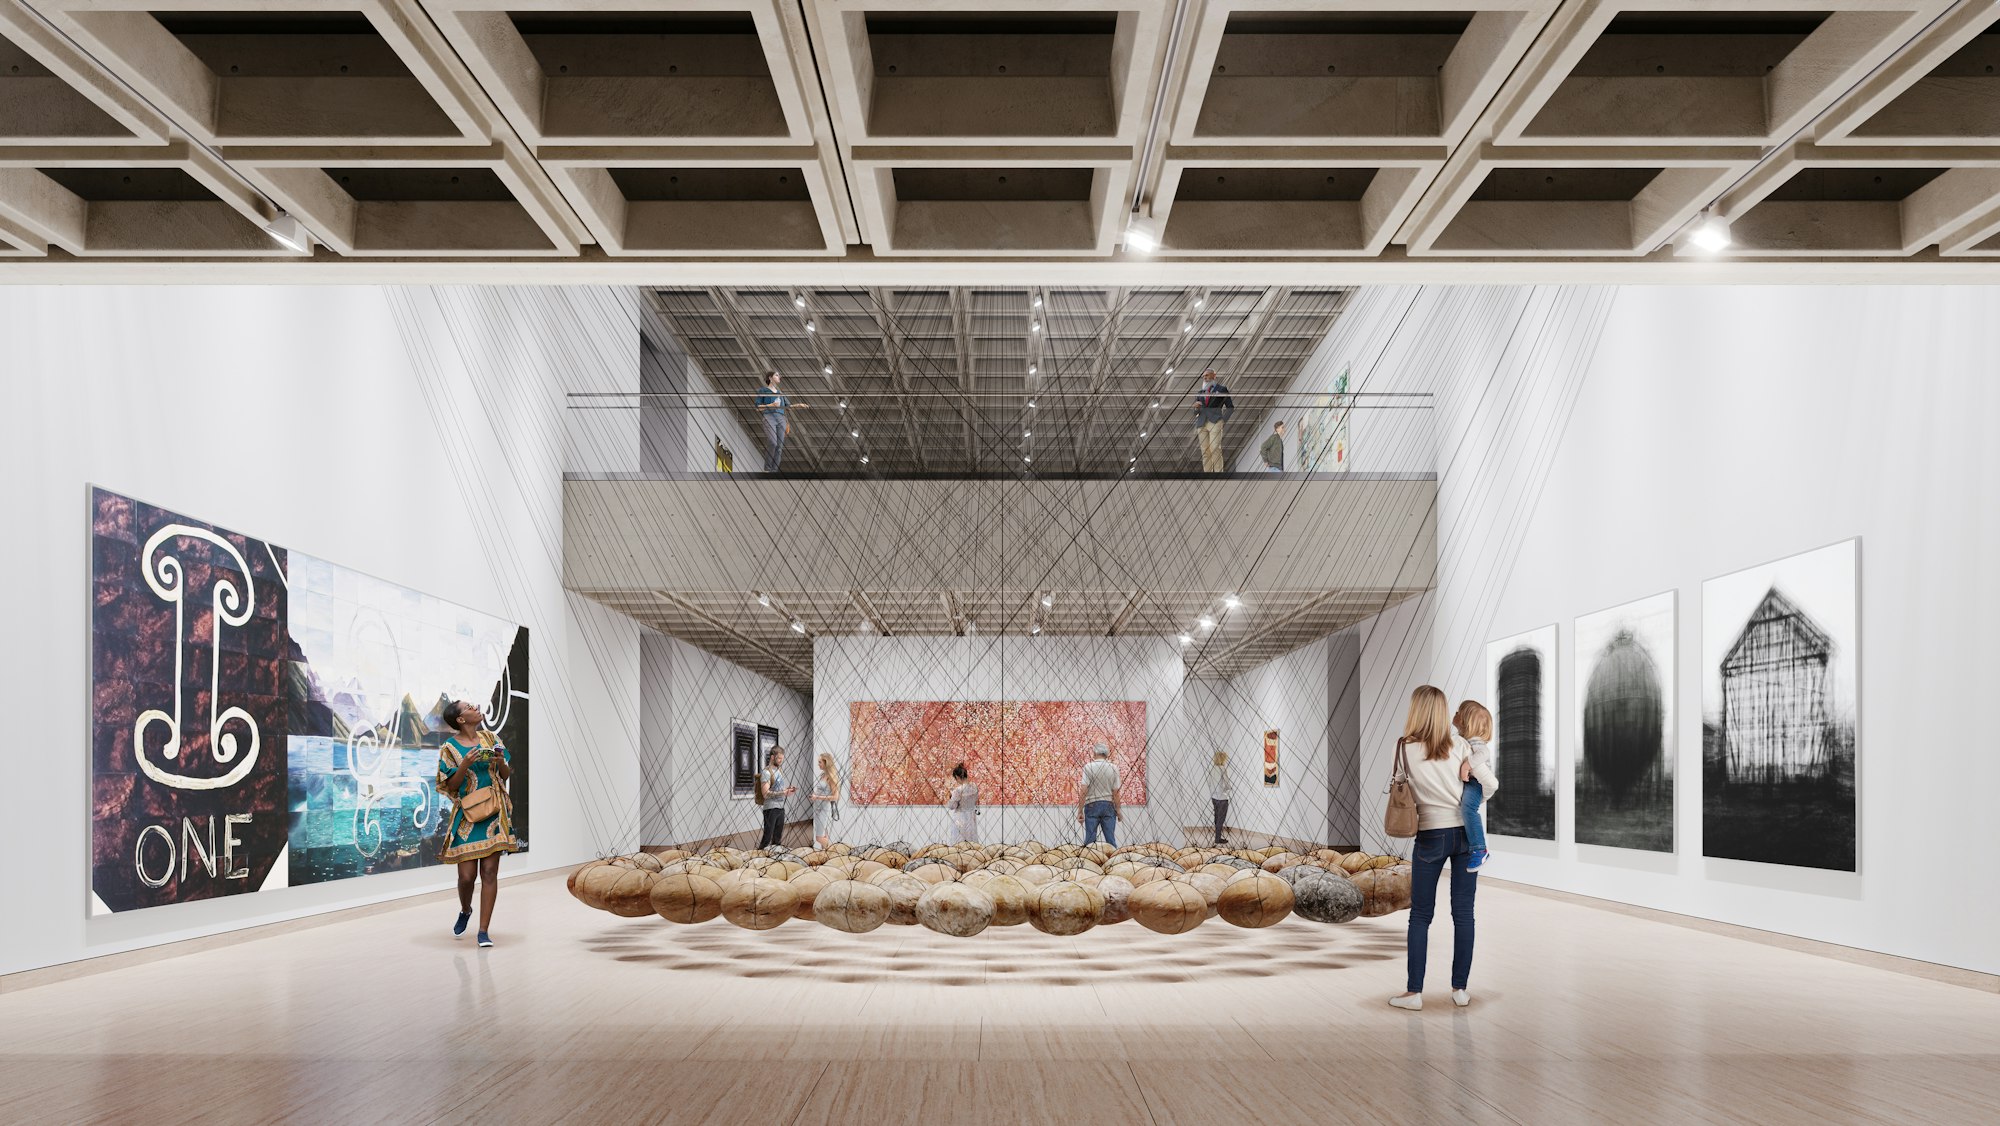 Image of the Art Gallery of New South Wales as produced by Mogamma for Tonkin Zulaikha Greer Architects © Mogamma. Featuring artworks left to right: Imants Tillers, Counting: one, two, three, 1988 © Imants Tillers; Ken Unsworth, Suspended stone circle II, 1974-77, 1988 © Ken Unsworth; Emily Kame Kngwarreye, Untitled (Alhalker), 1992 © Emily Kame Kngwarreye; Idris Khan, every… Bernd & Hilla Becher Prison Type Gasholder every… Bernd & Hilla Becher Spherical Type Gasholder every… Bernd & Hilla Becher Gable Sided House, 2004, printed 2005 © Idris Khan, courtesy Victoria Miro Gallery, London.